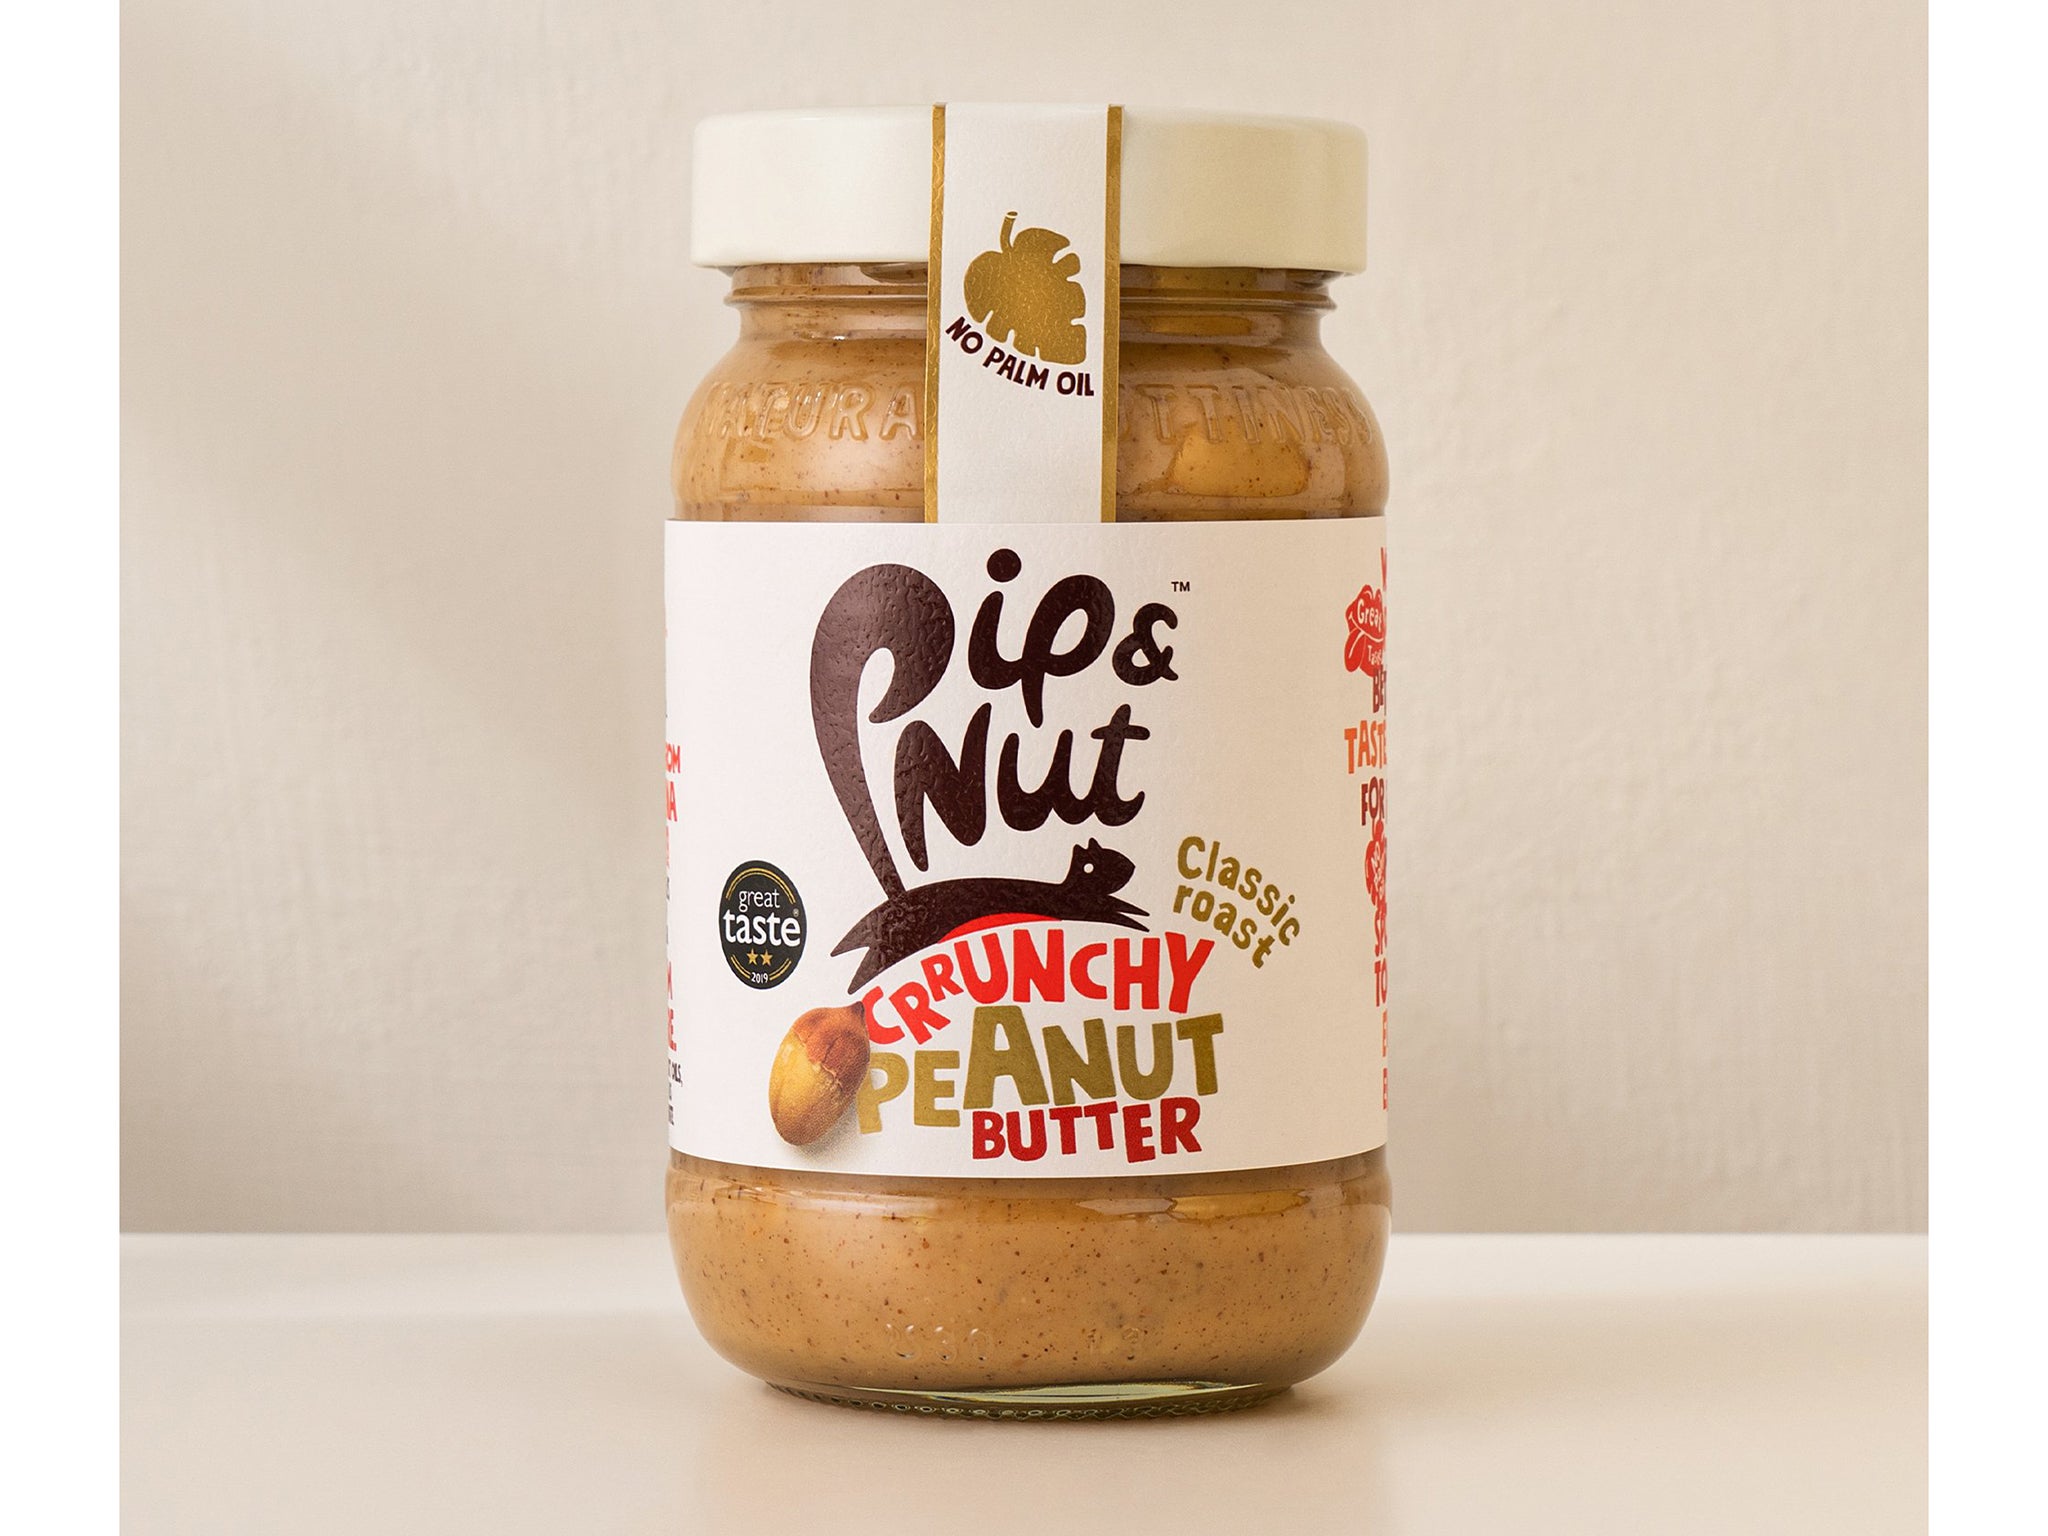 indybest-pip-and-nut-peanut-butter.jpeg